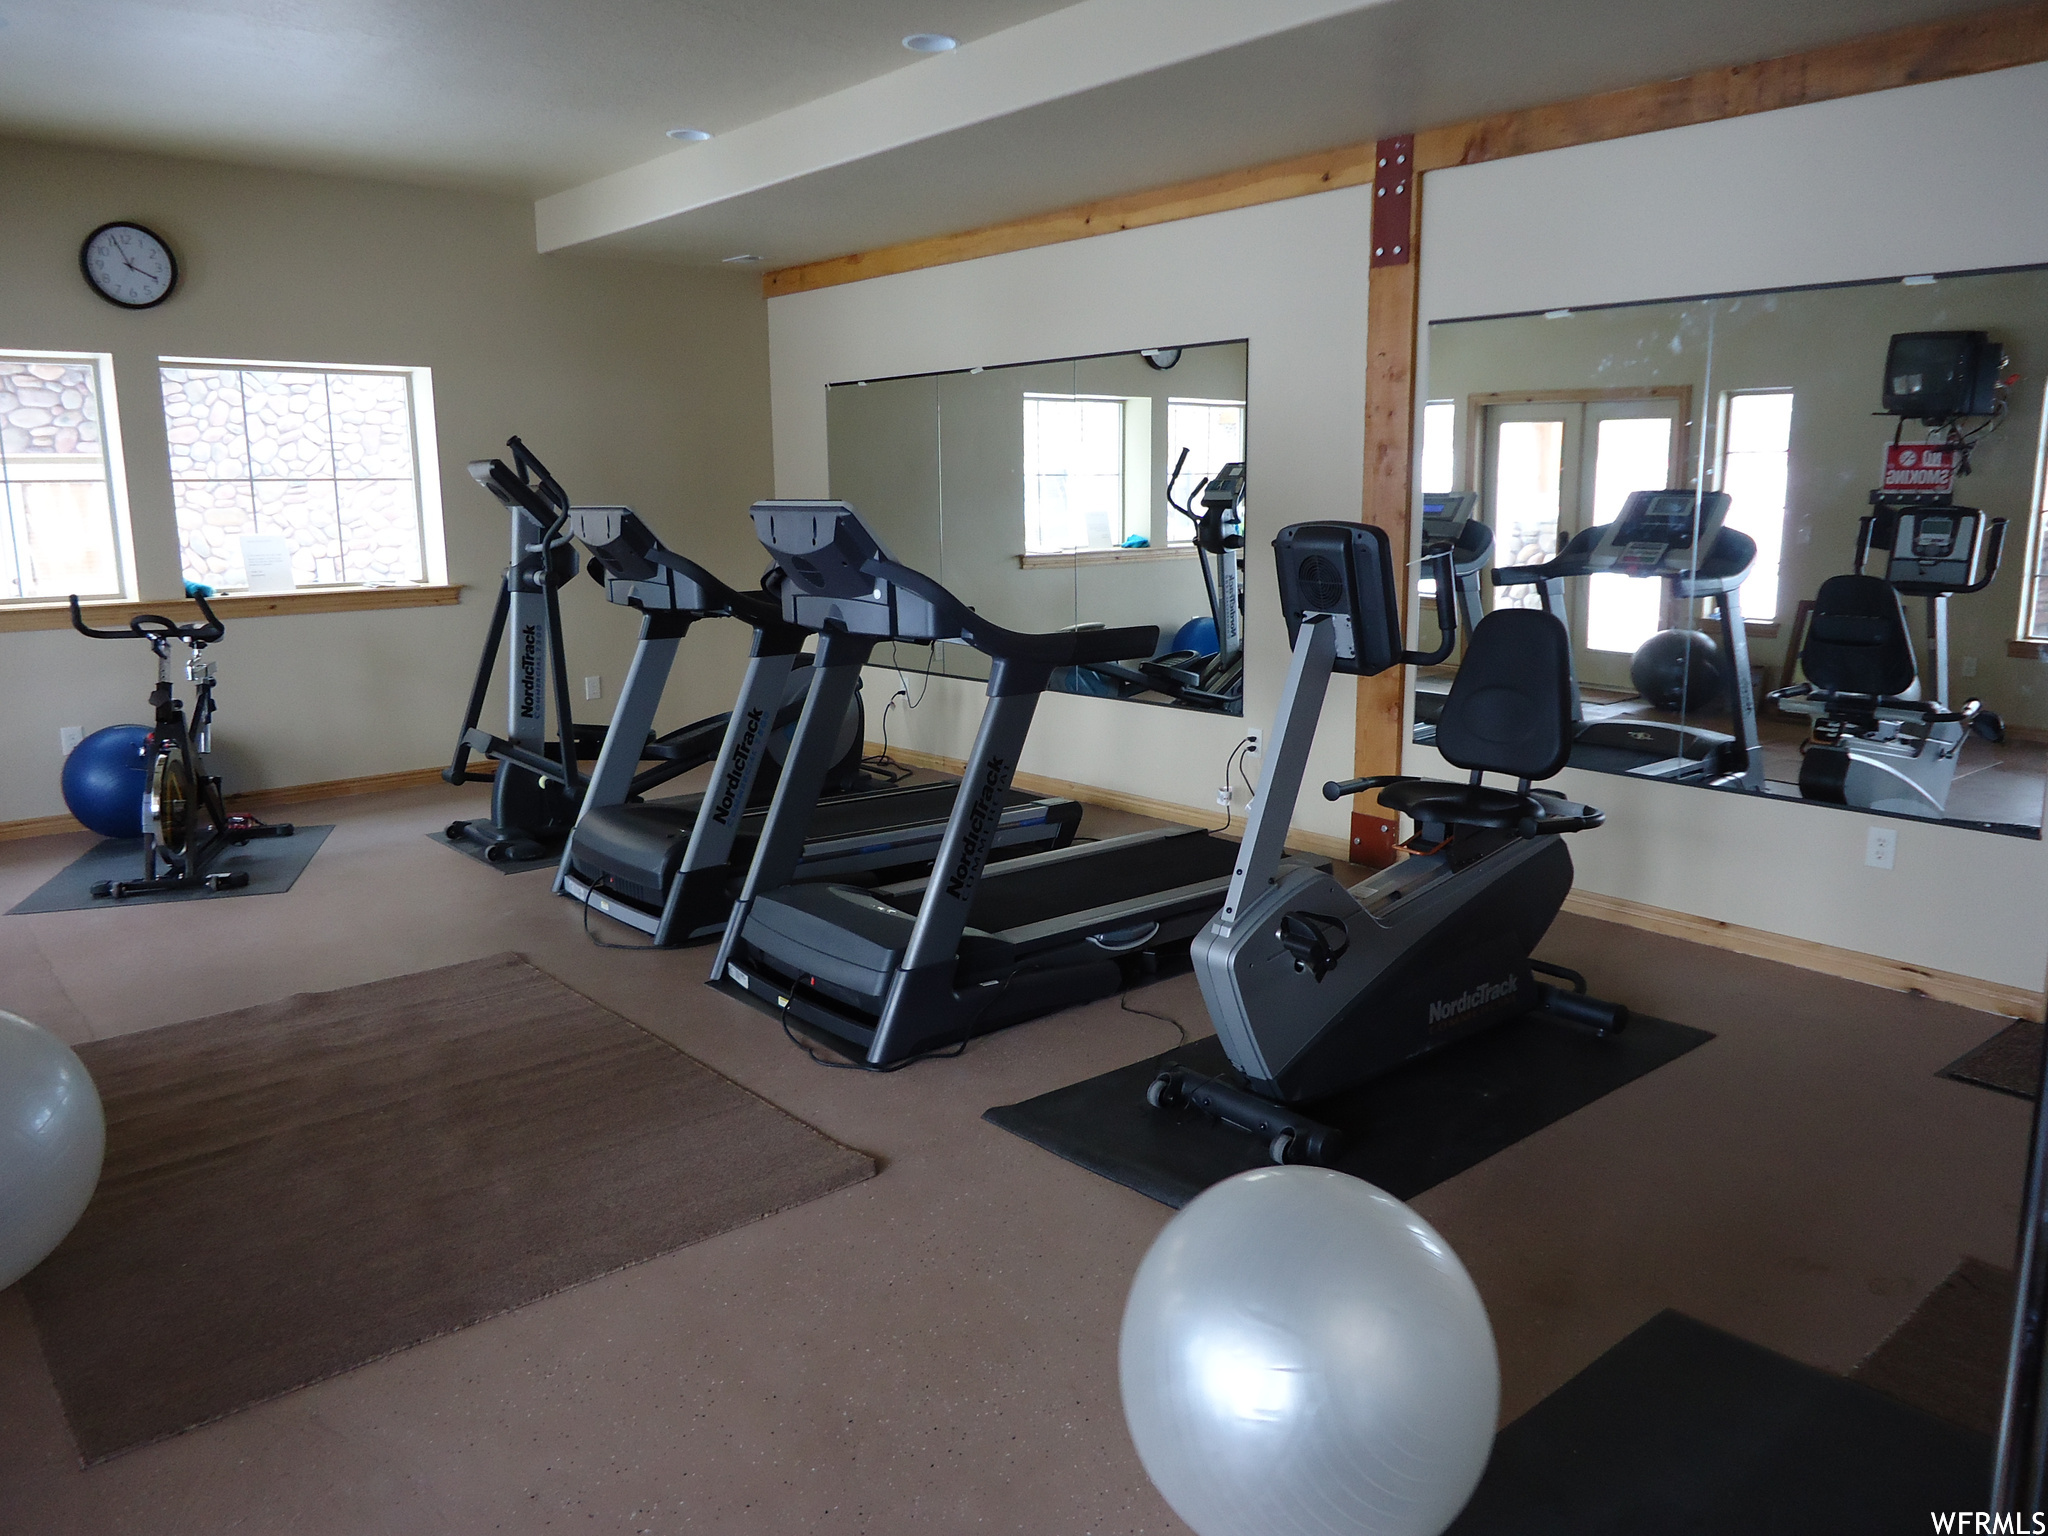 Community Gym: Workout area featuring a healthy amount of sunlight, wood beam ceiling, and TV